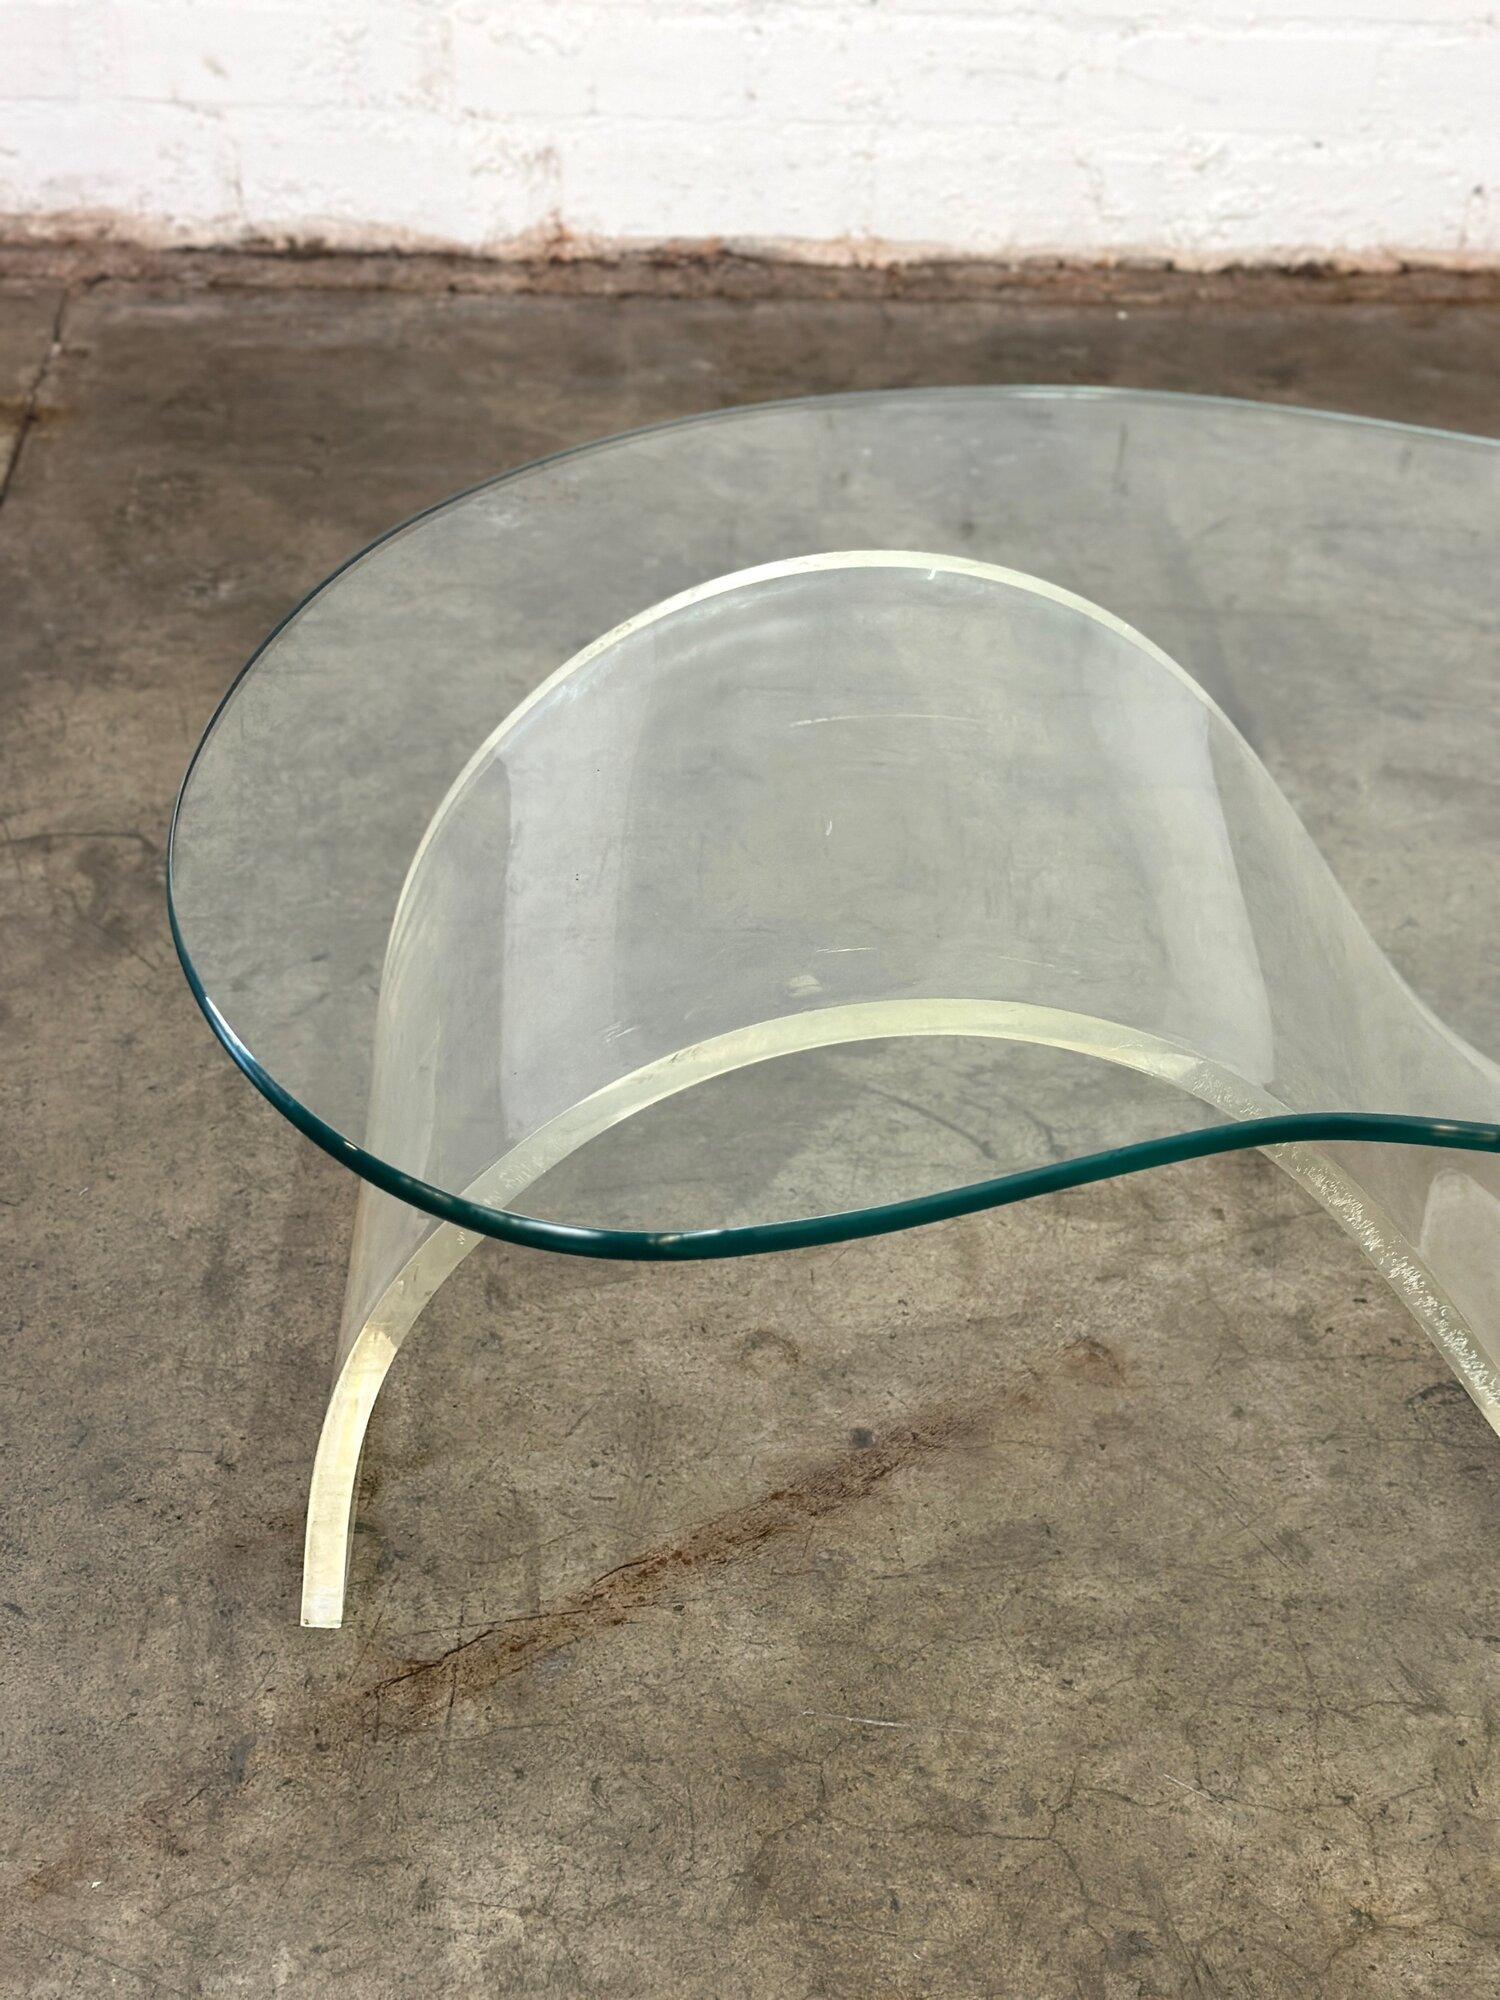 W50 D27 D24 D27 H15

Post Modern Biomorphic coffee table in the style of Vladimir Kagan. Table features a biomorphic glass top and a serpentine shaped lucite base. Item is in overall good vintage condition with some signs of wear. 